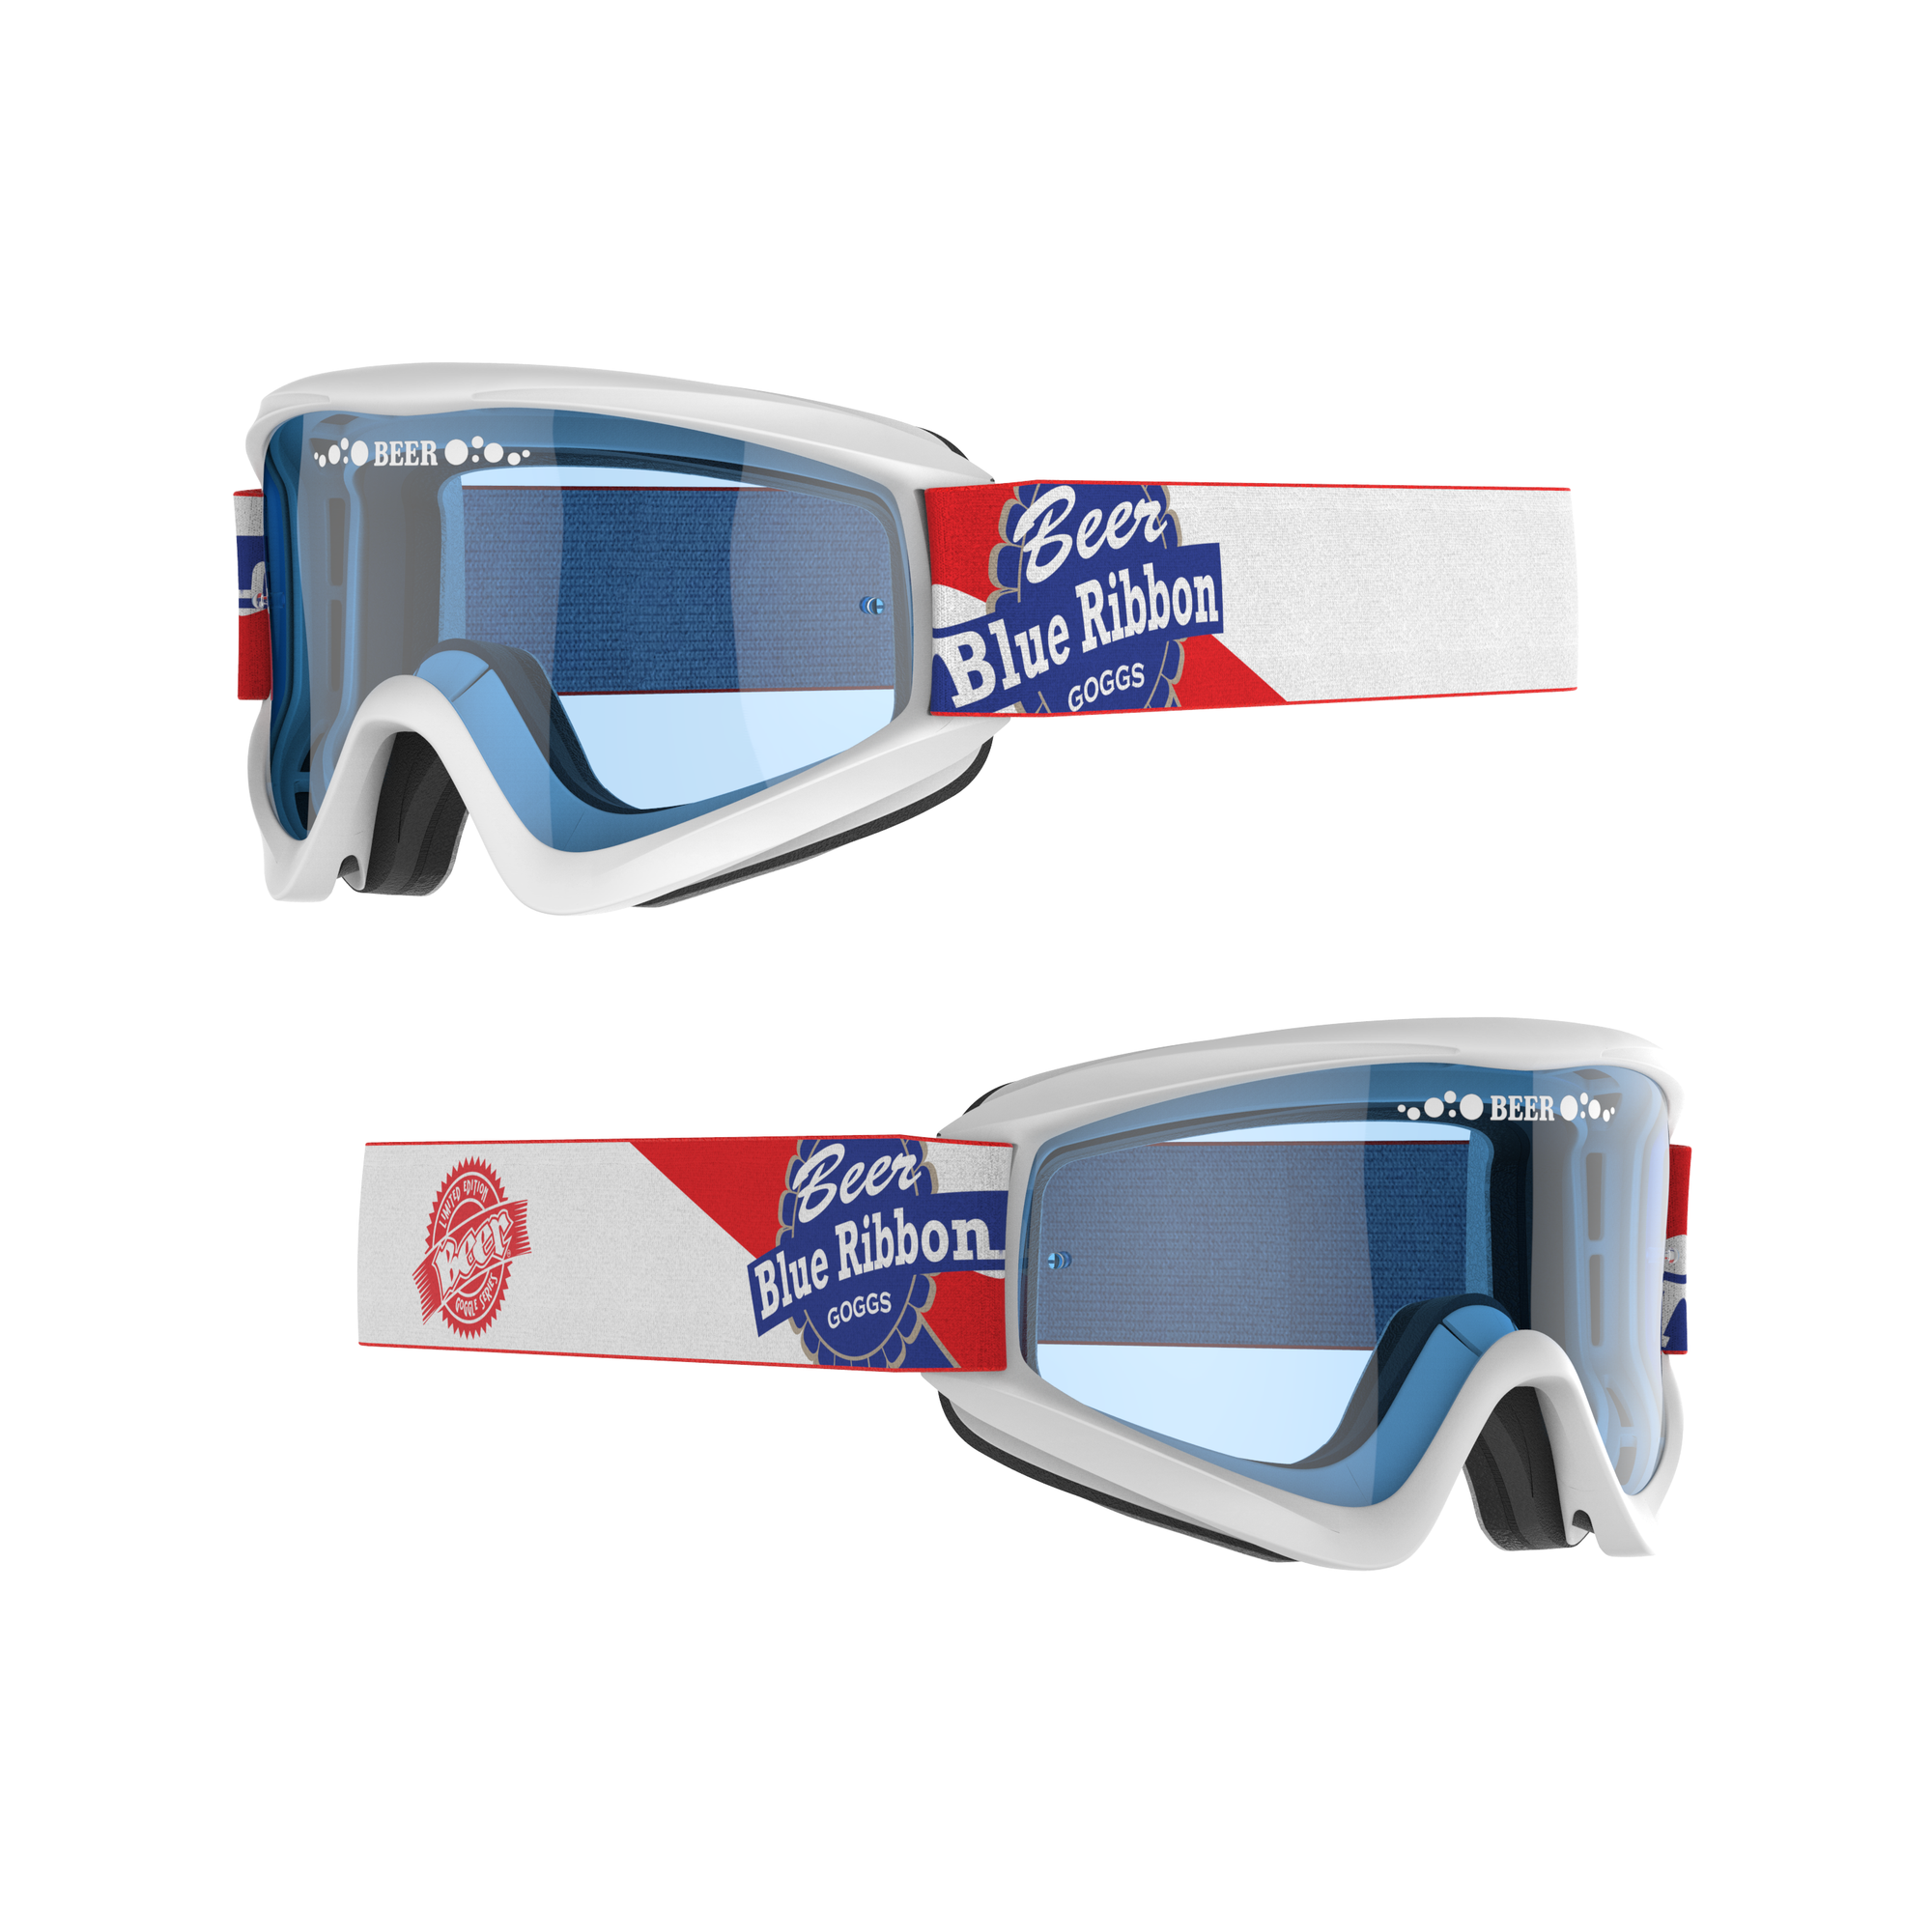 Beer Goggles Dry BEER Limited Edition "PBR"